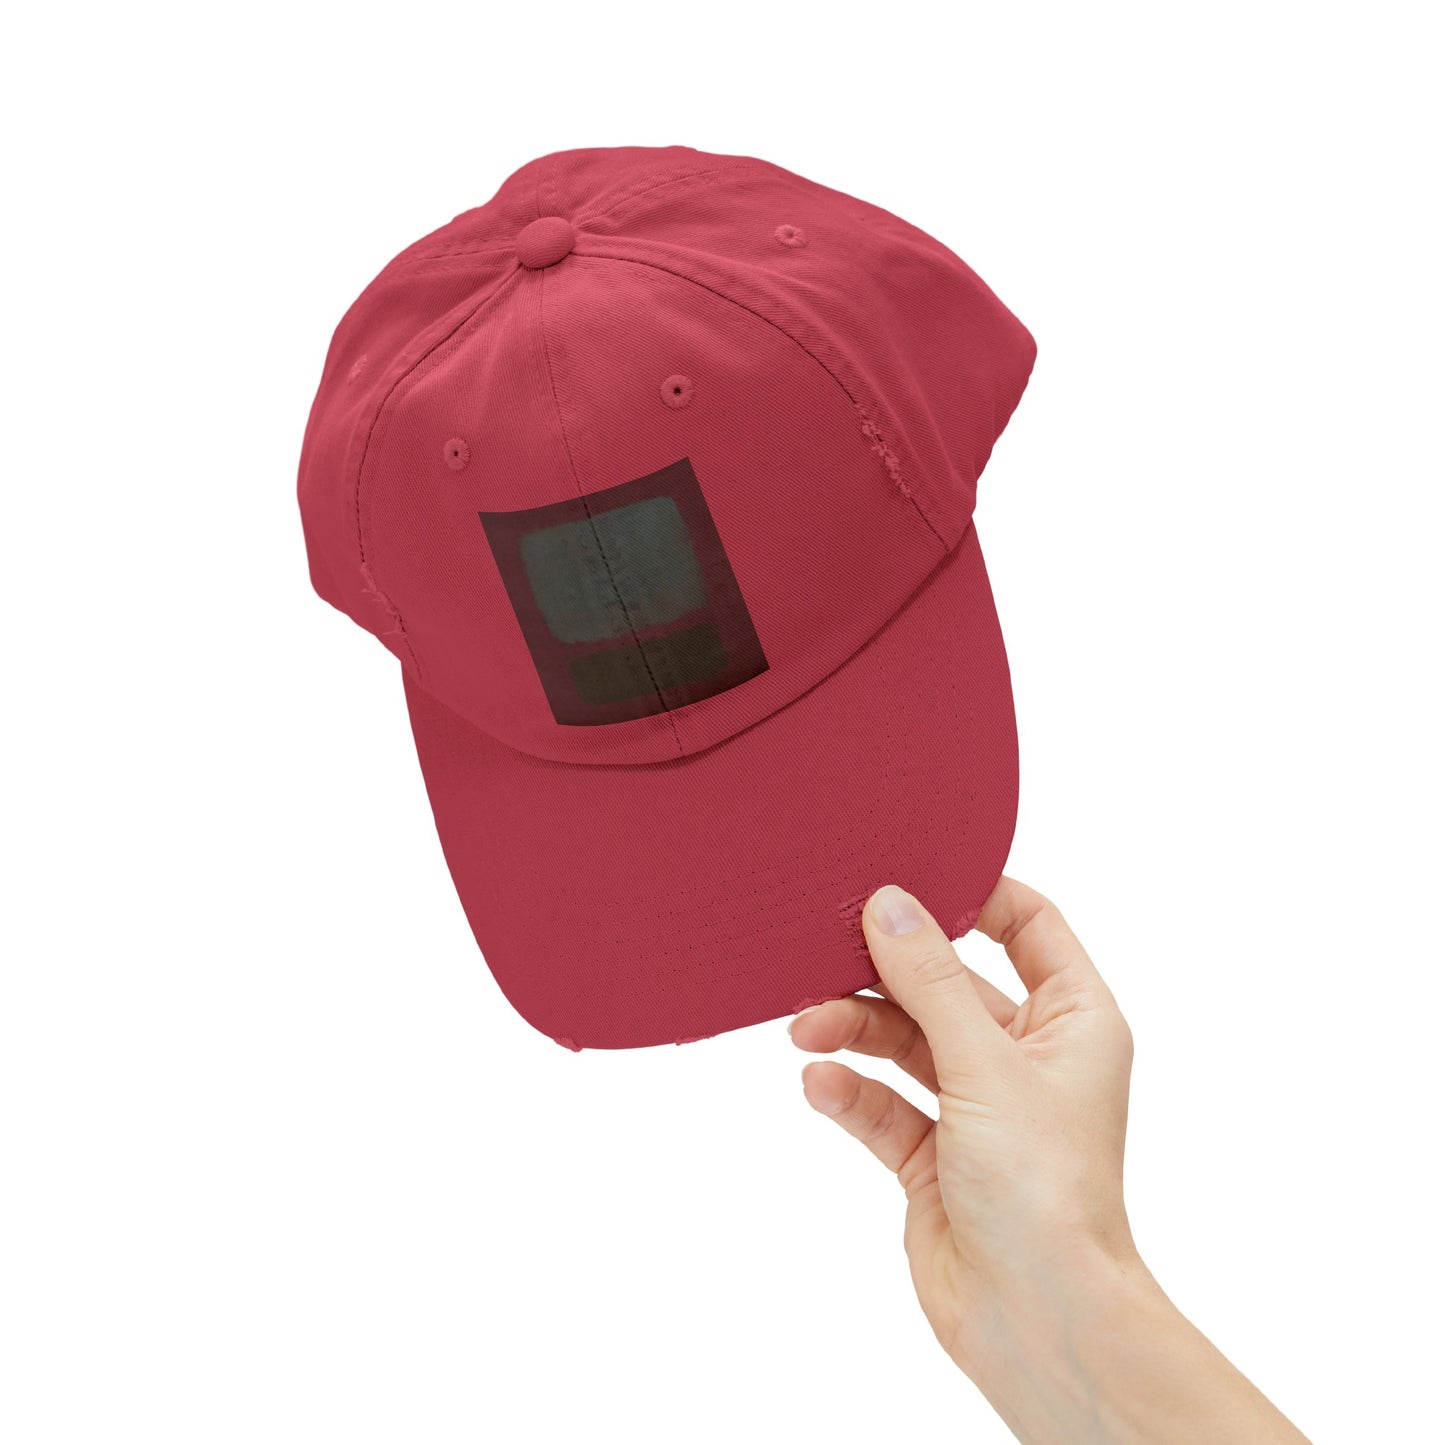 a person holding a red hat with a black square on it